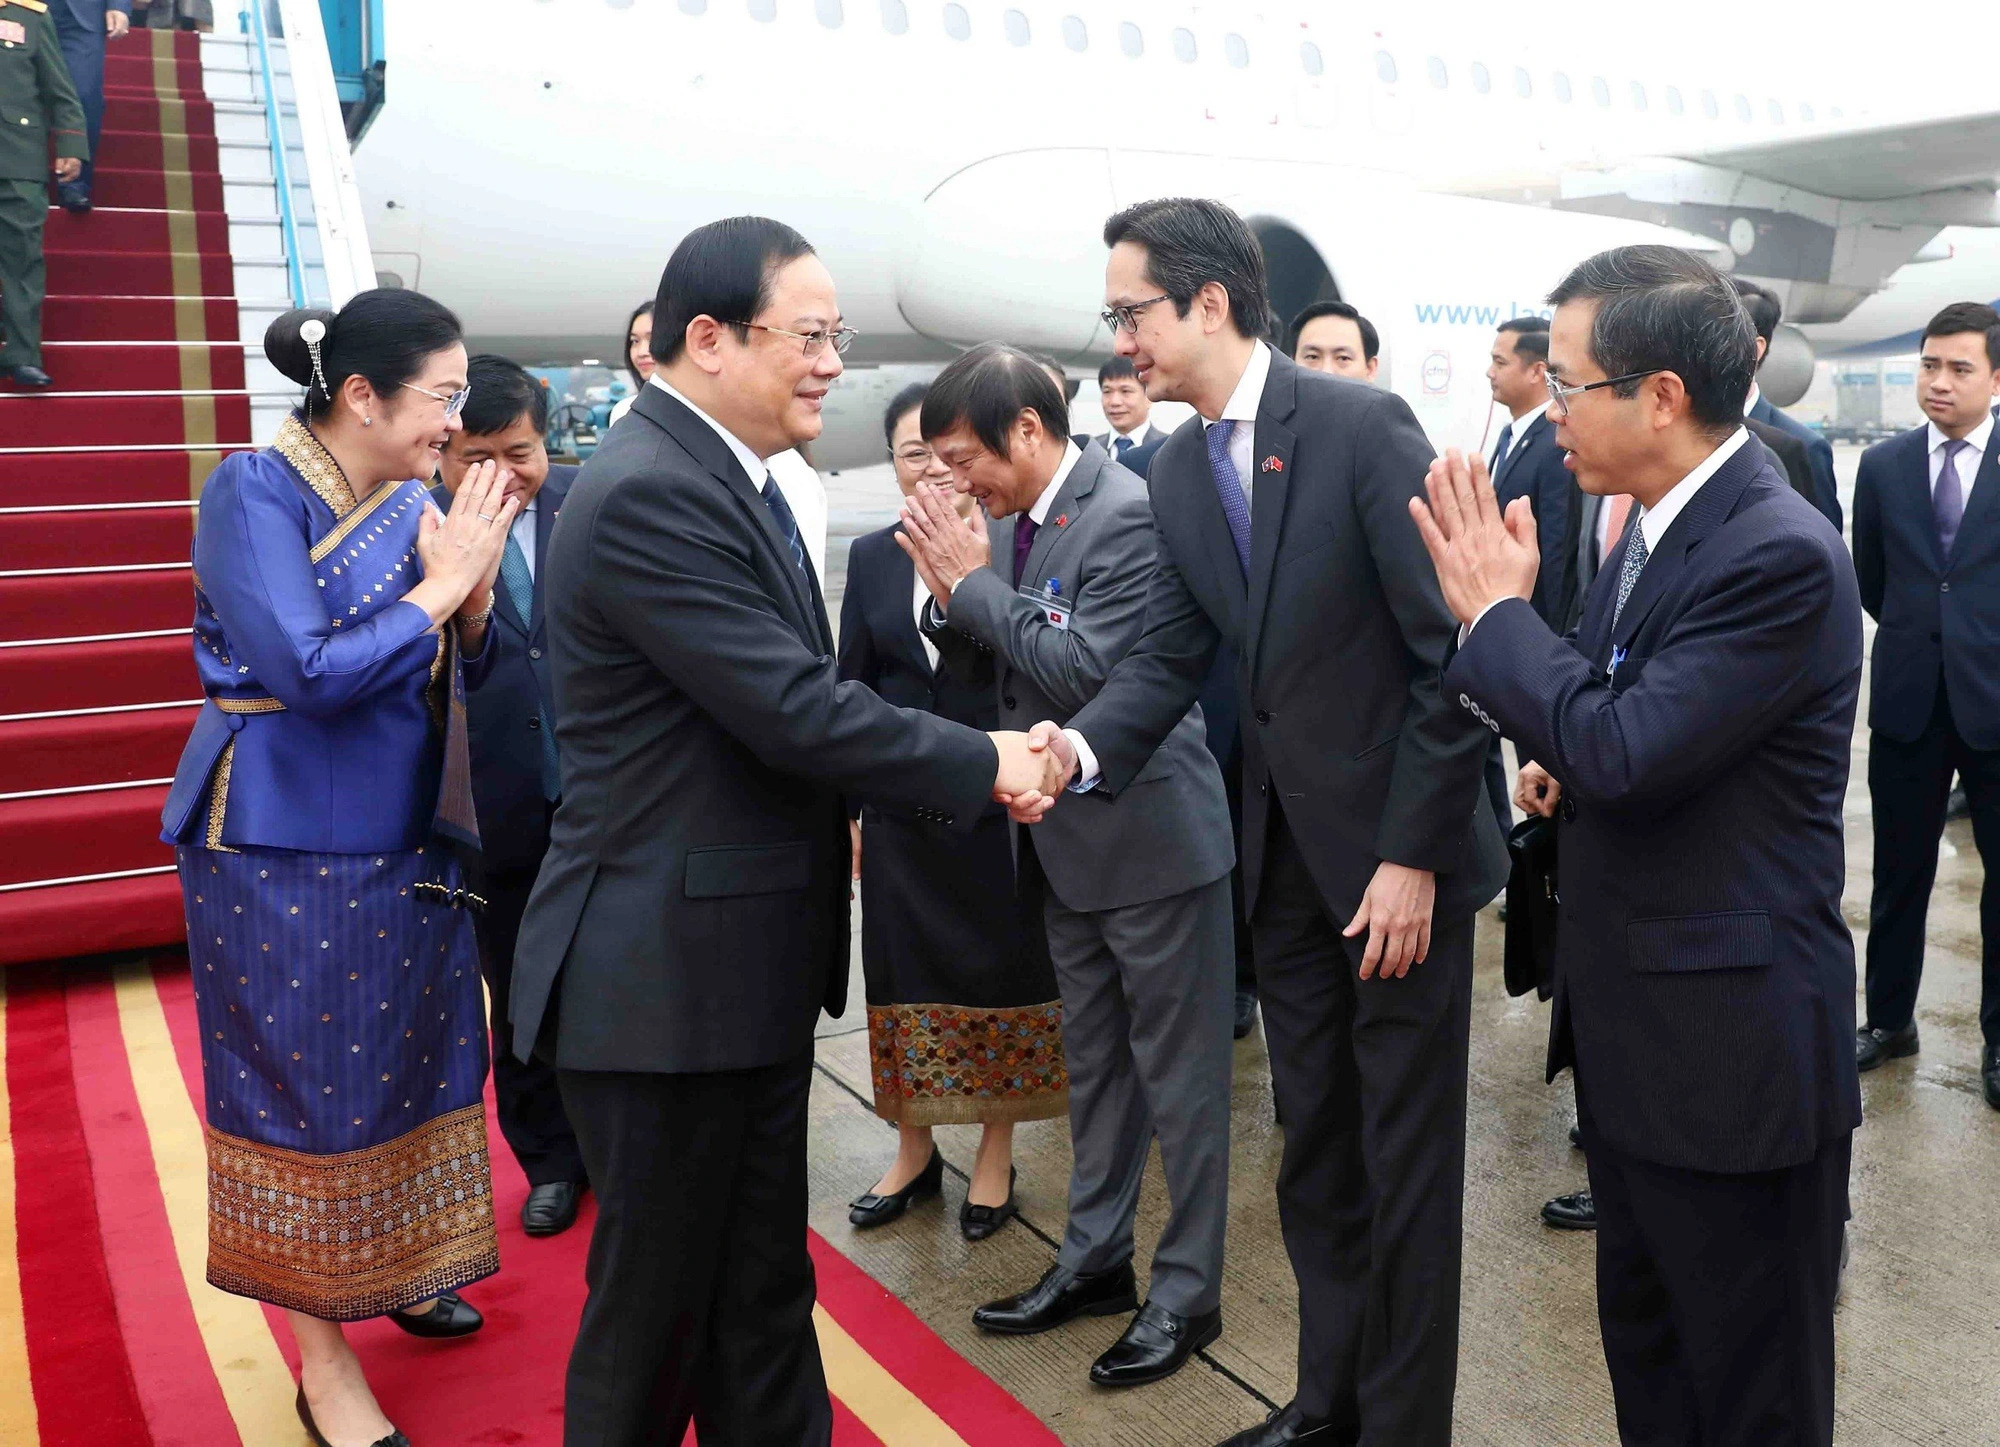 Vietnamese Deputy Minister of Foreign Affairs Do Hung Viet (R, 2nd) shakes hands with Lao Prime Minister Sonexay Siphandone at Noi Bai International Airport in Hanoi, January 6, 2023. Photo: Vietnam News Agency